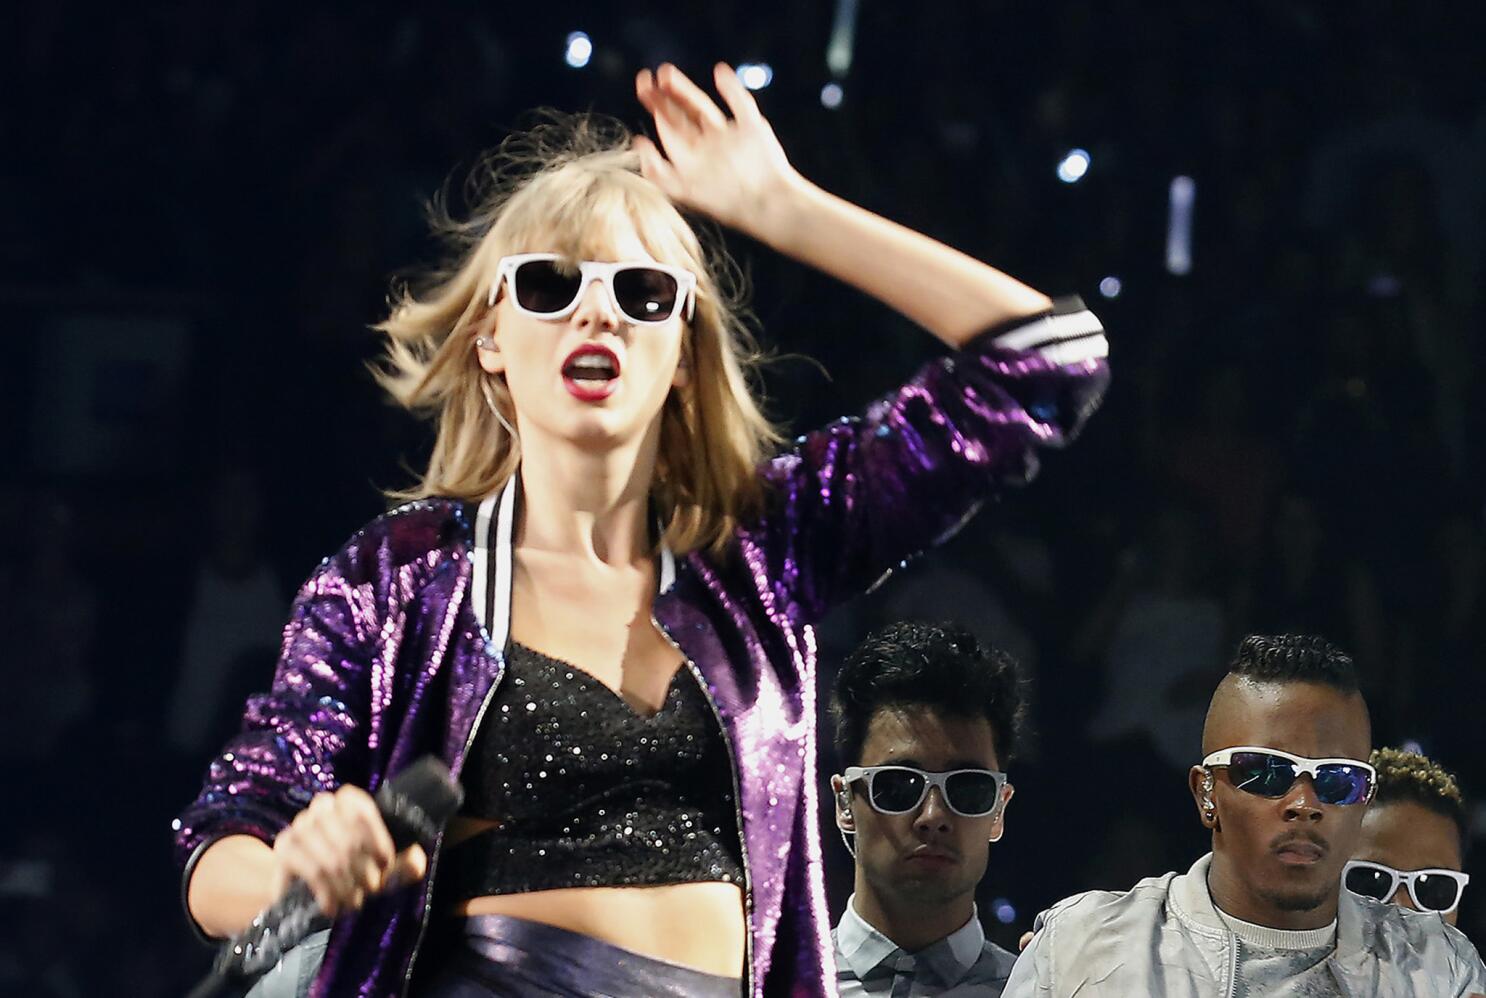 Taylor Swift fans 'shake it off' at The Wooly's sold-out show